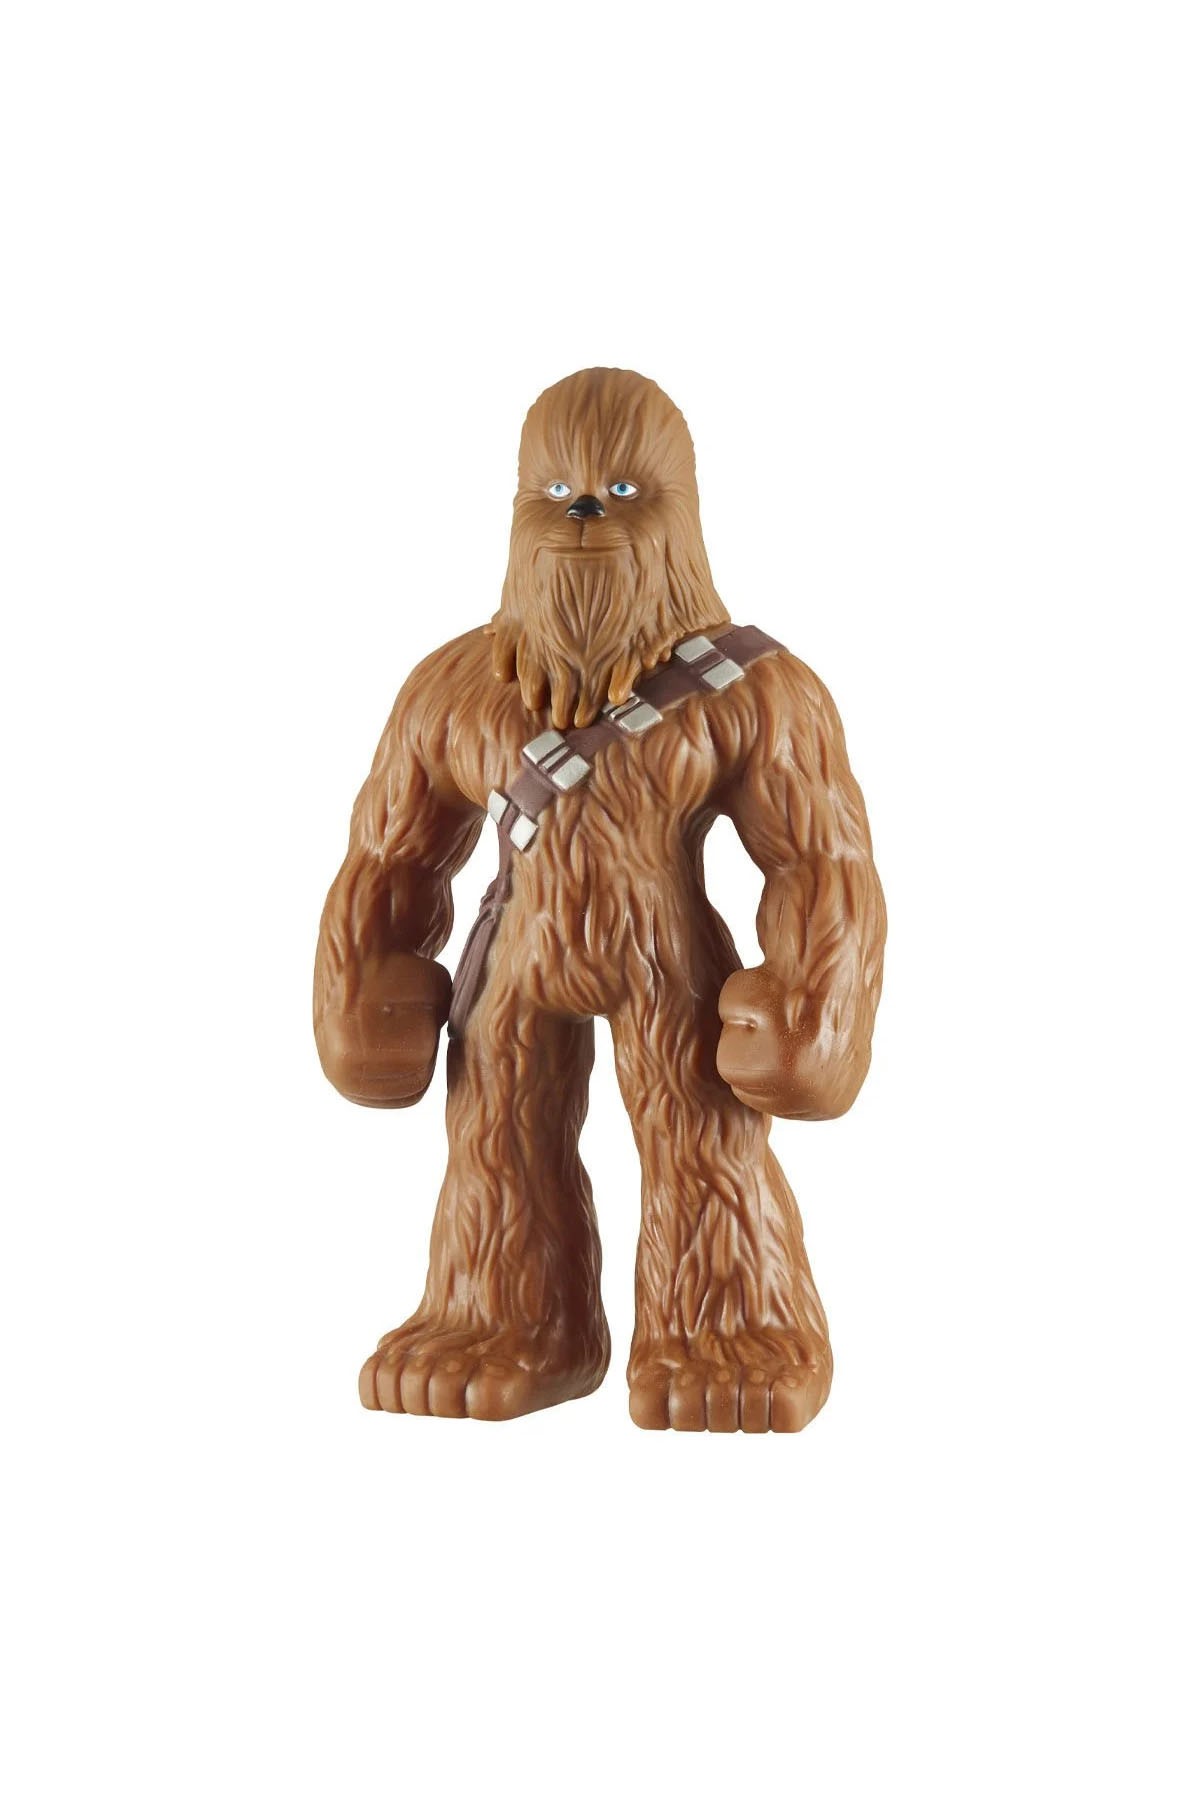 Stretch Armstrong Chewbacca 07692